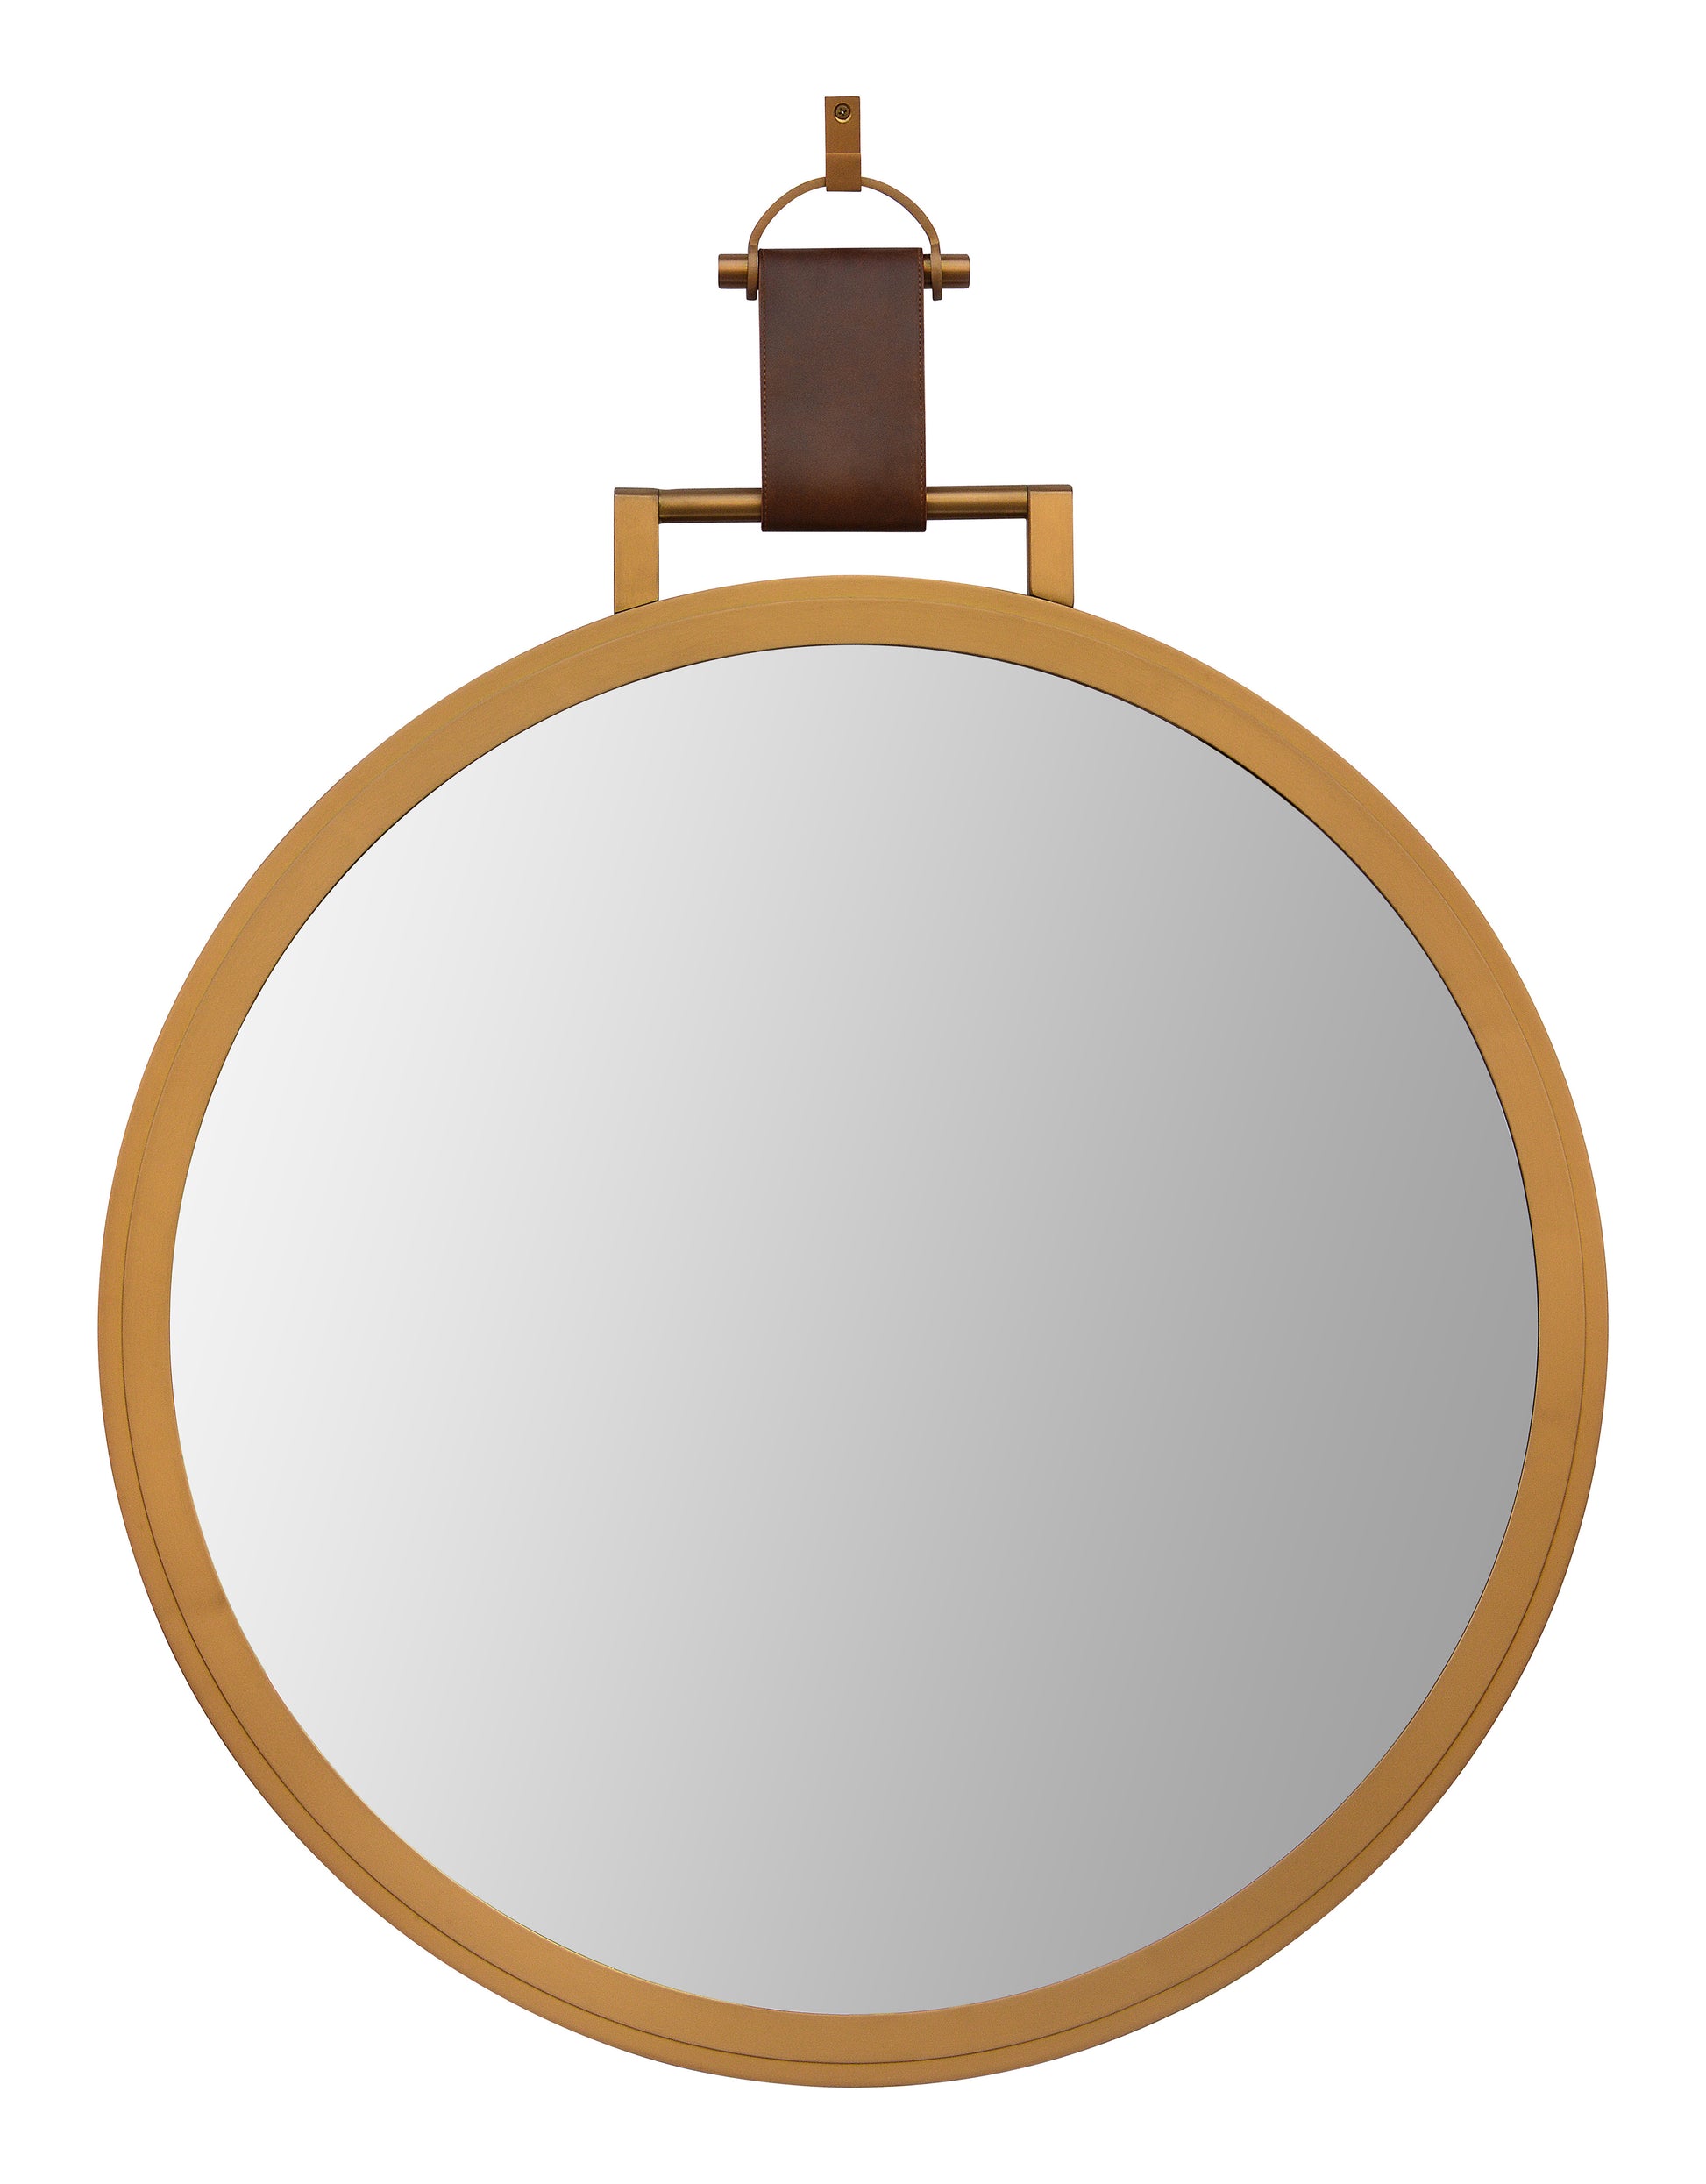 Mirror with leather strap